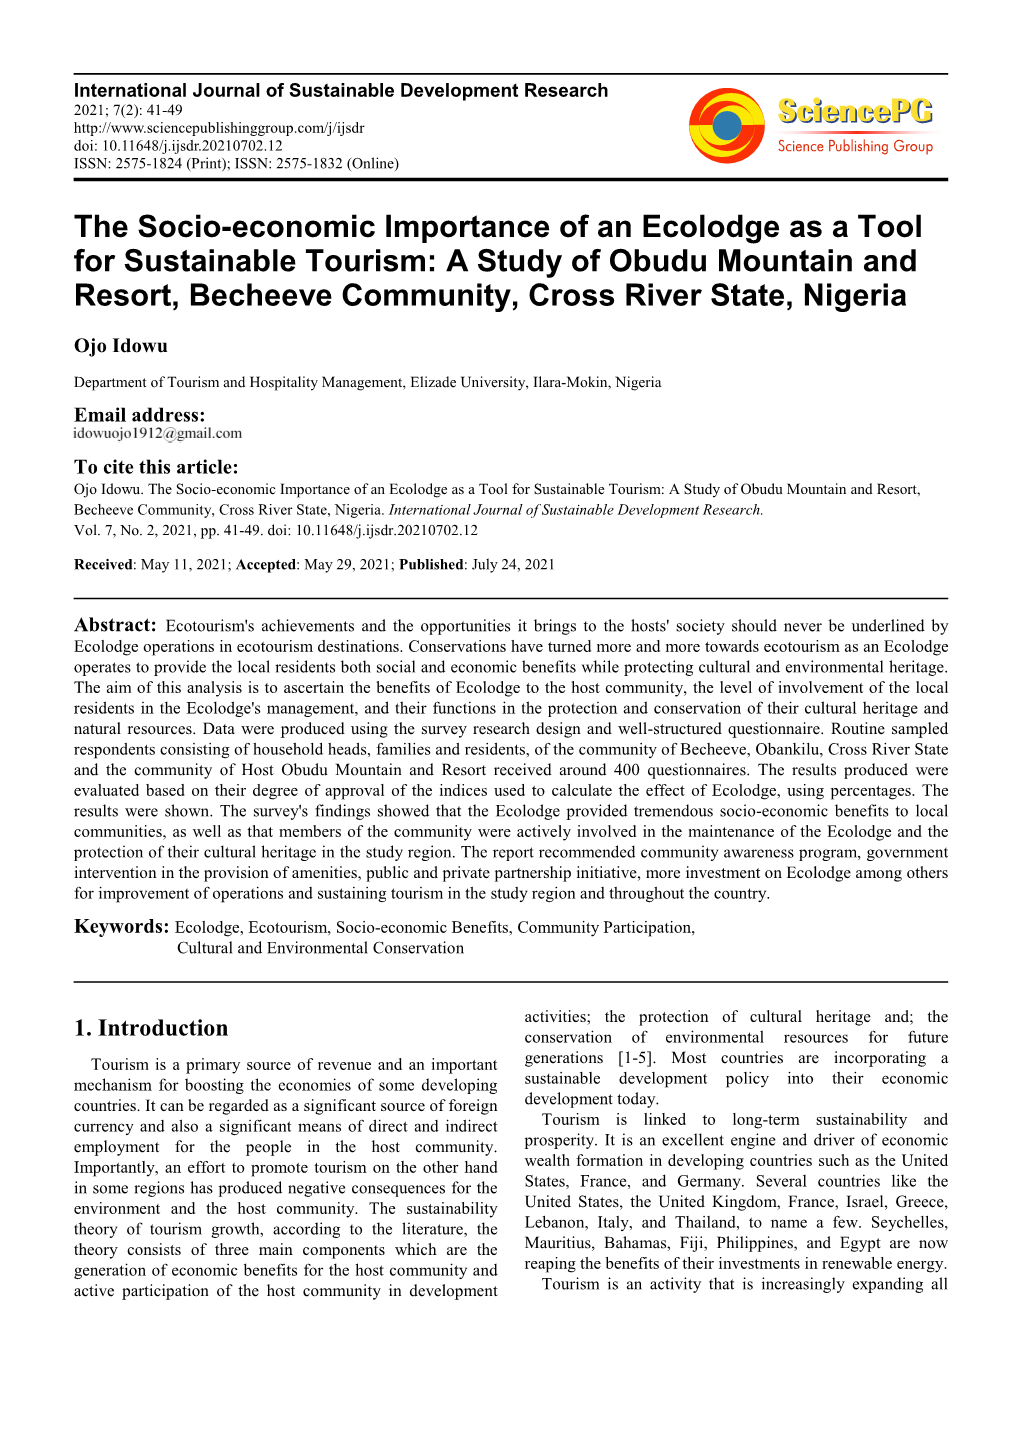 The Socio-Economic Importance of an Ecolodge As a Tool for Sustainable Tourism: a Study of Obudu Mountain and Resort, Becheeve Community, Cross River State, Nigeria